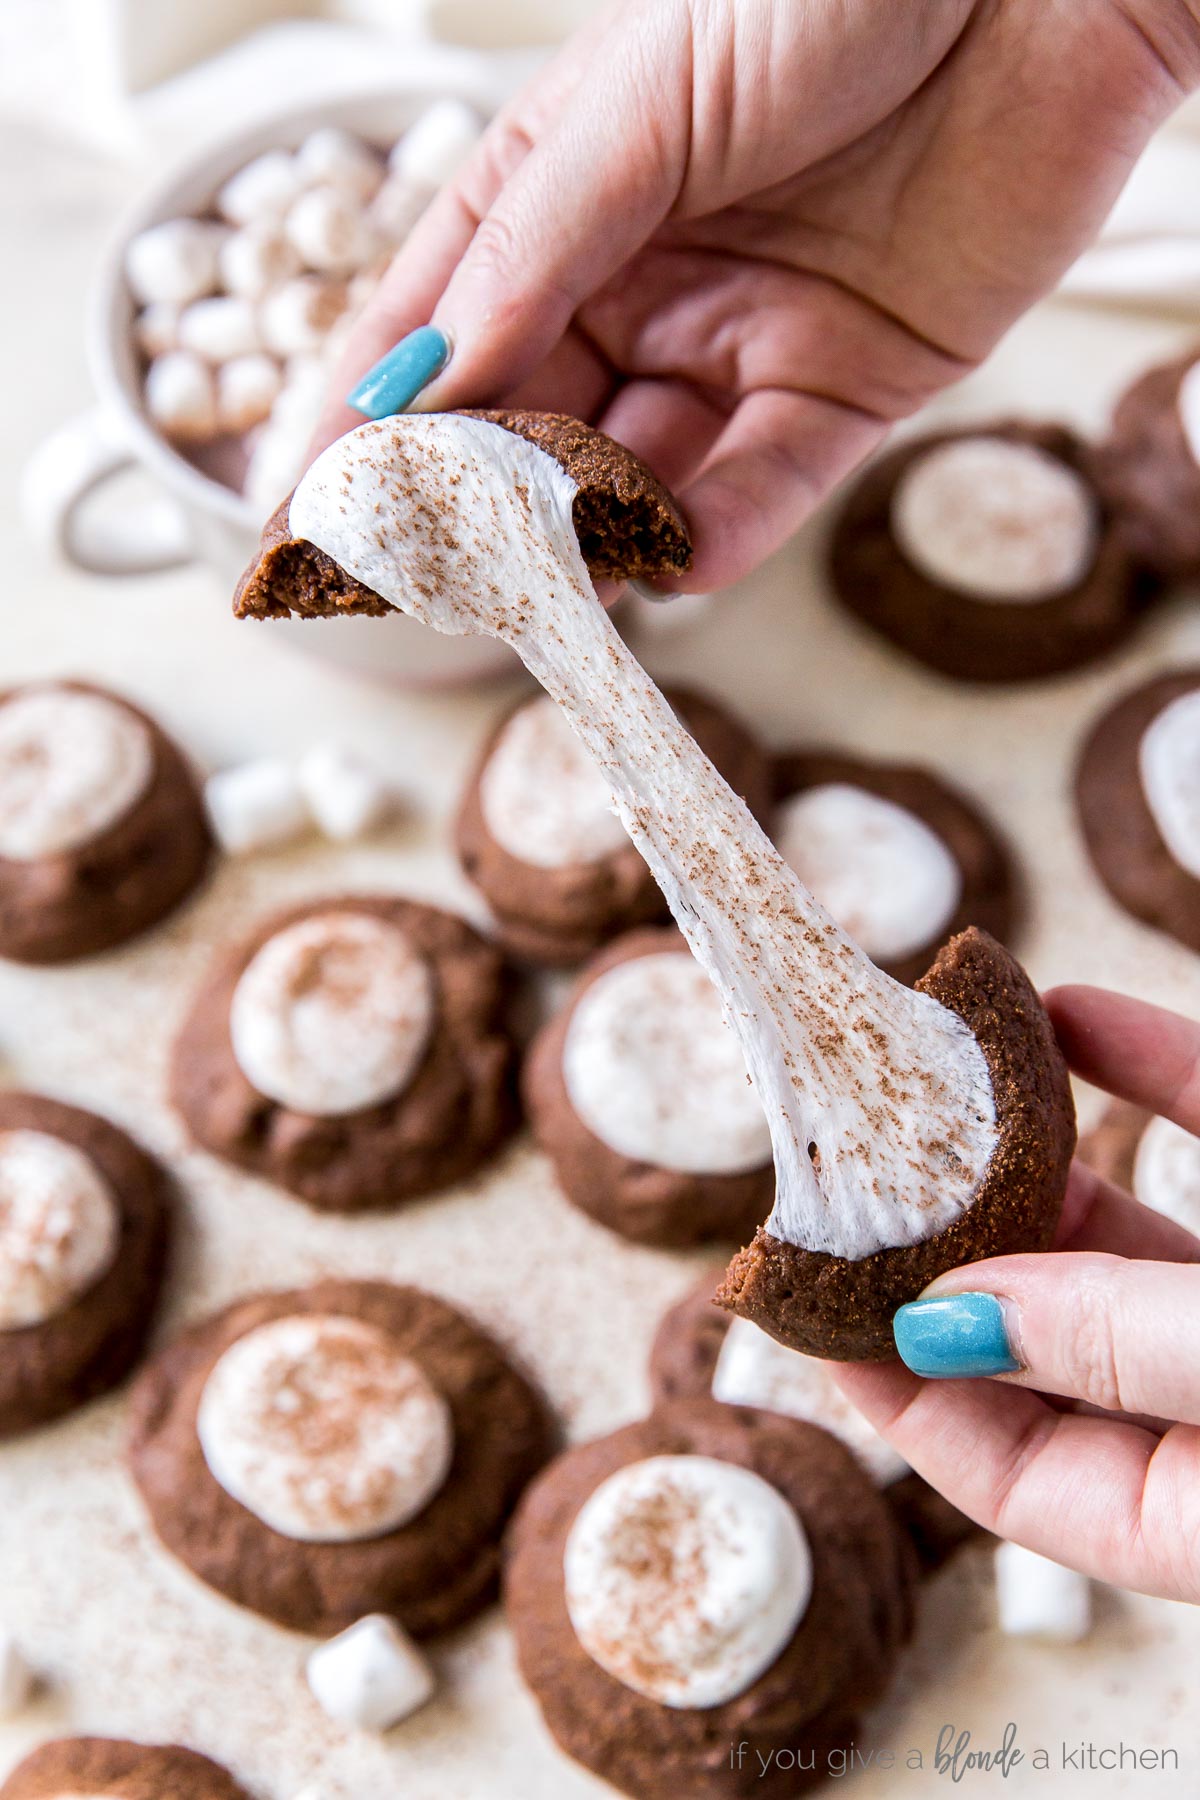 hands pulling hot cocoa cookie apart to show gooey marshmallow